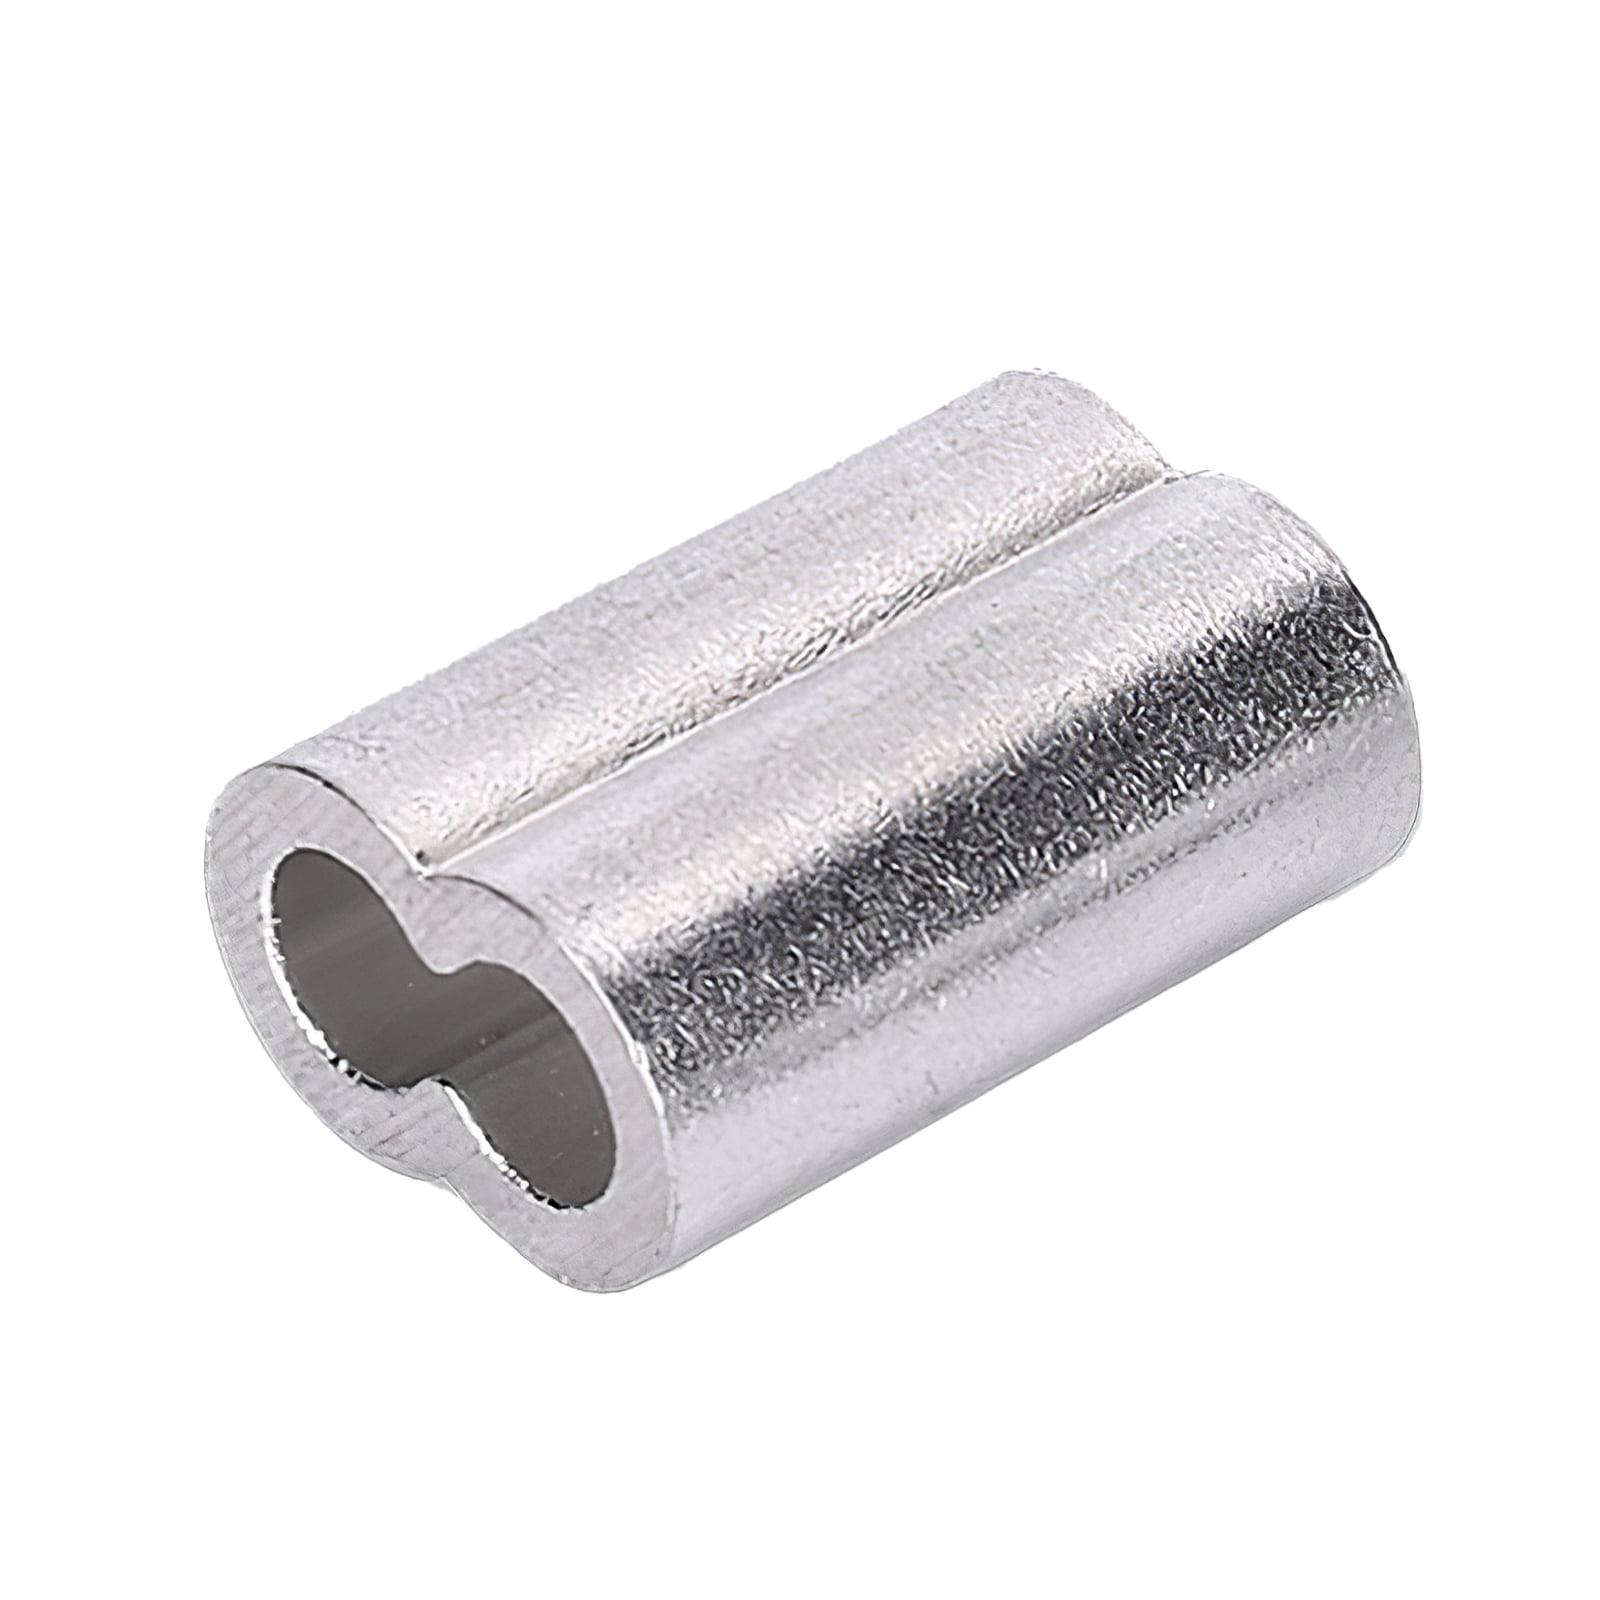 Aluminium Swages Crimps Ferrule for 1mm 12mm Stainless Steel Wire Rope Cable 